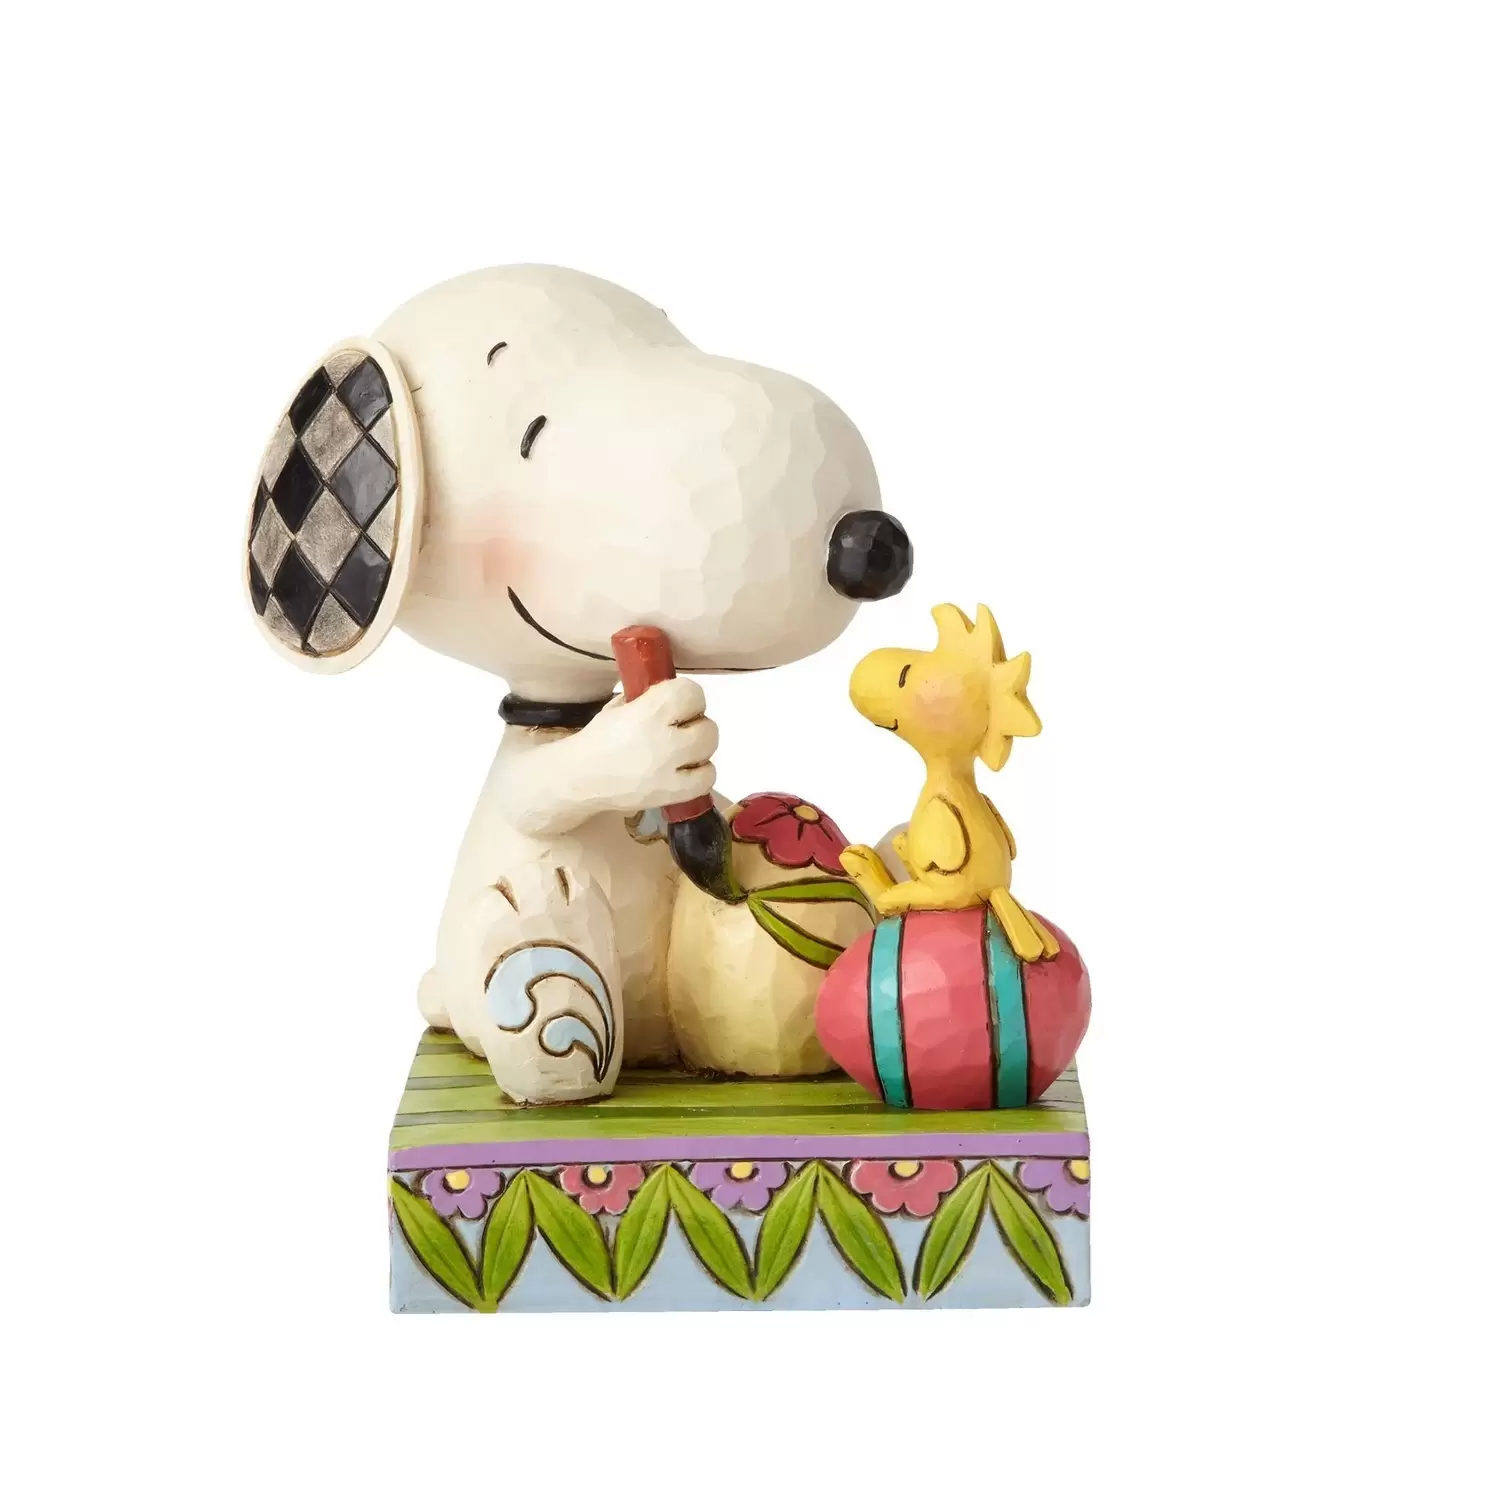 Peanuts - Jim Shore - A Colorful Tradition - Snoopy and Woodstock with Easter Eggs